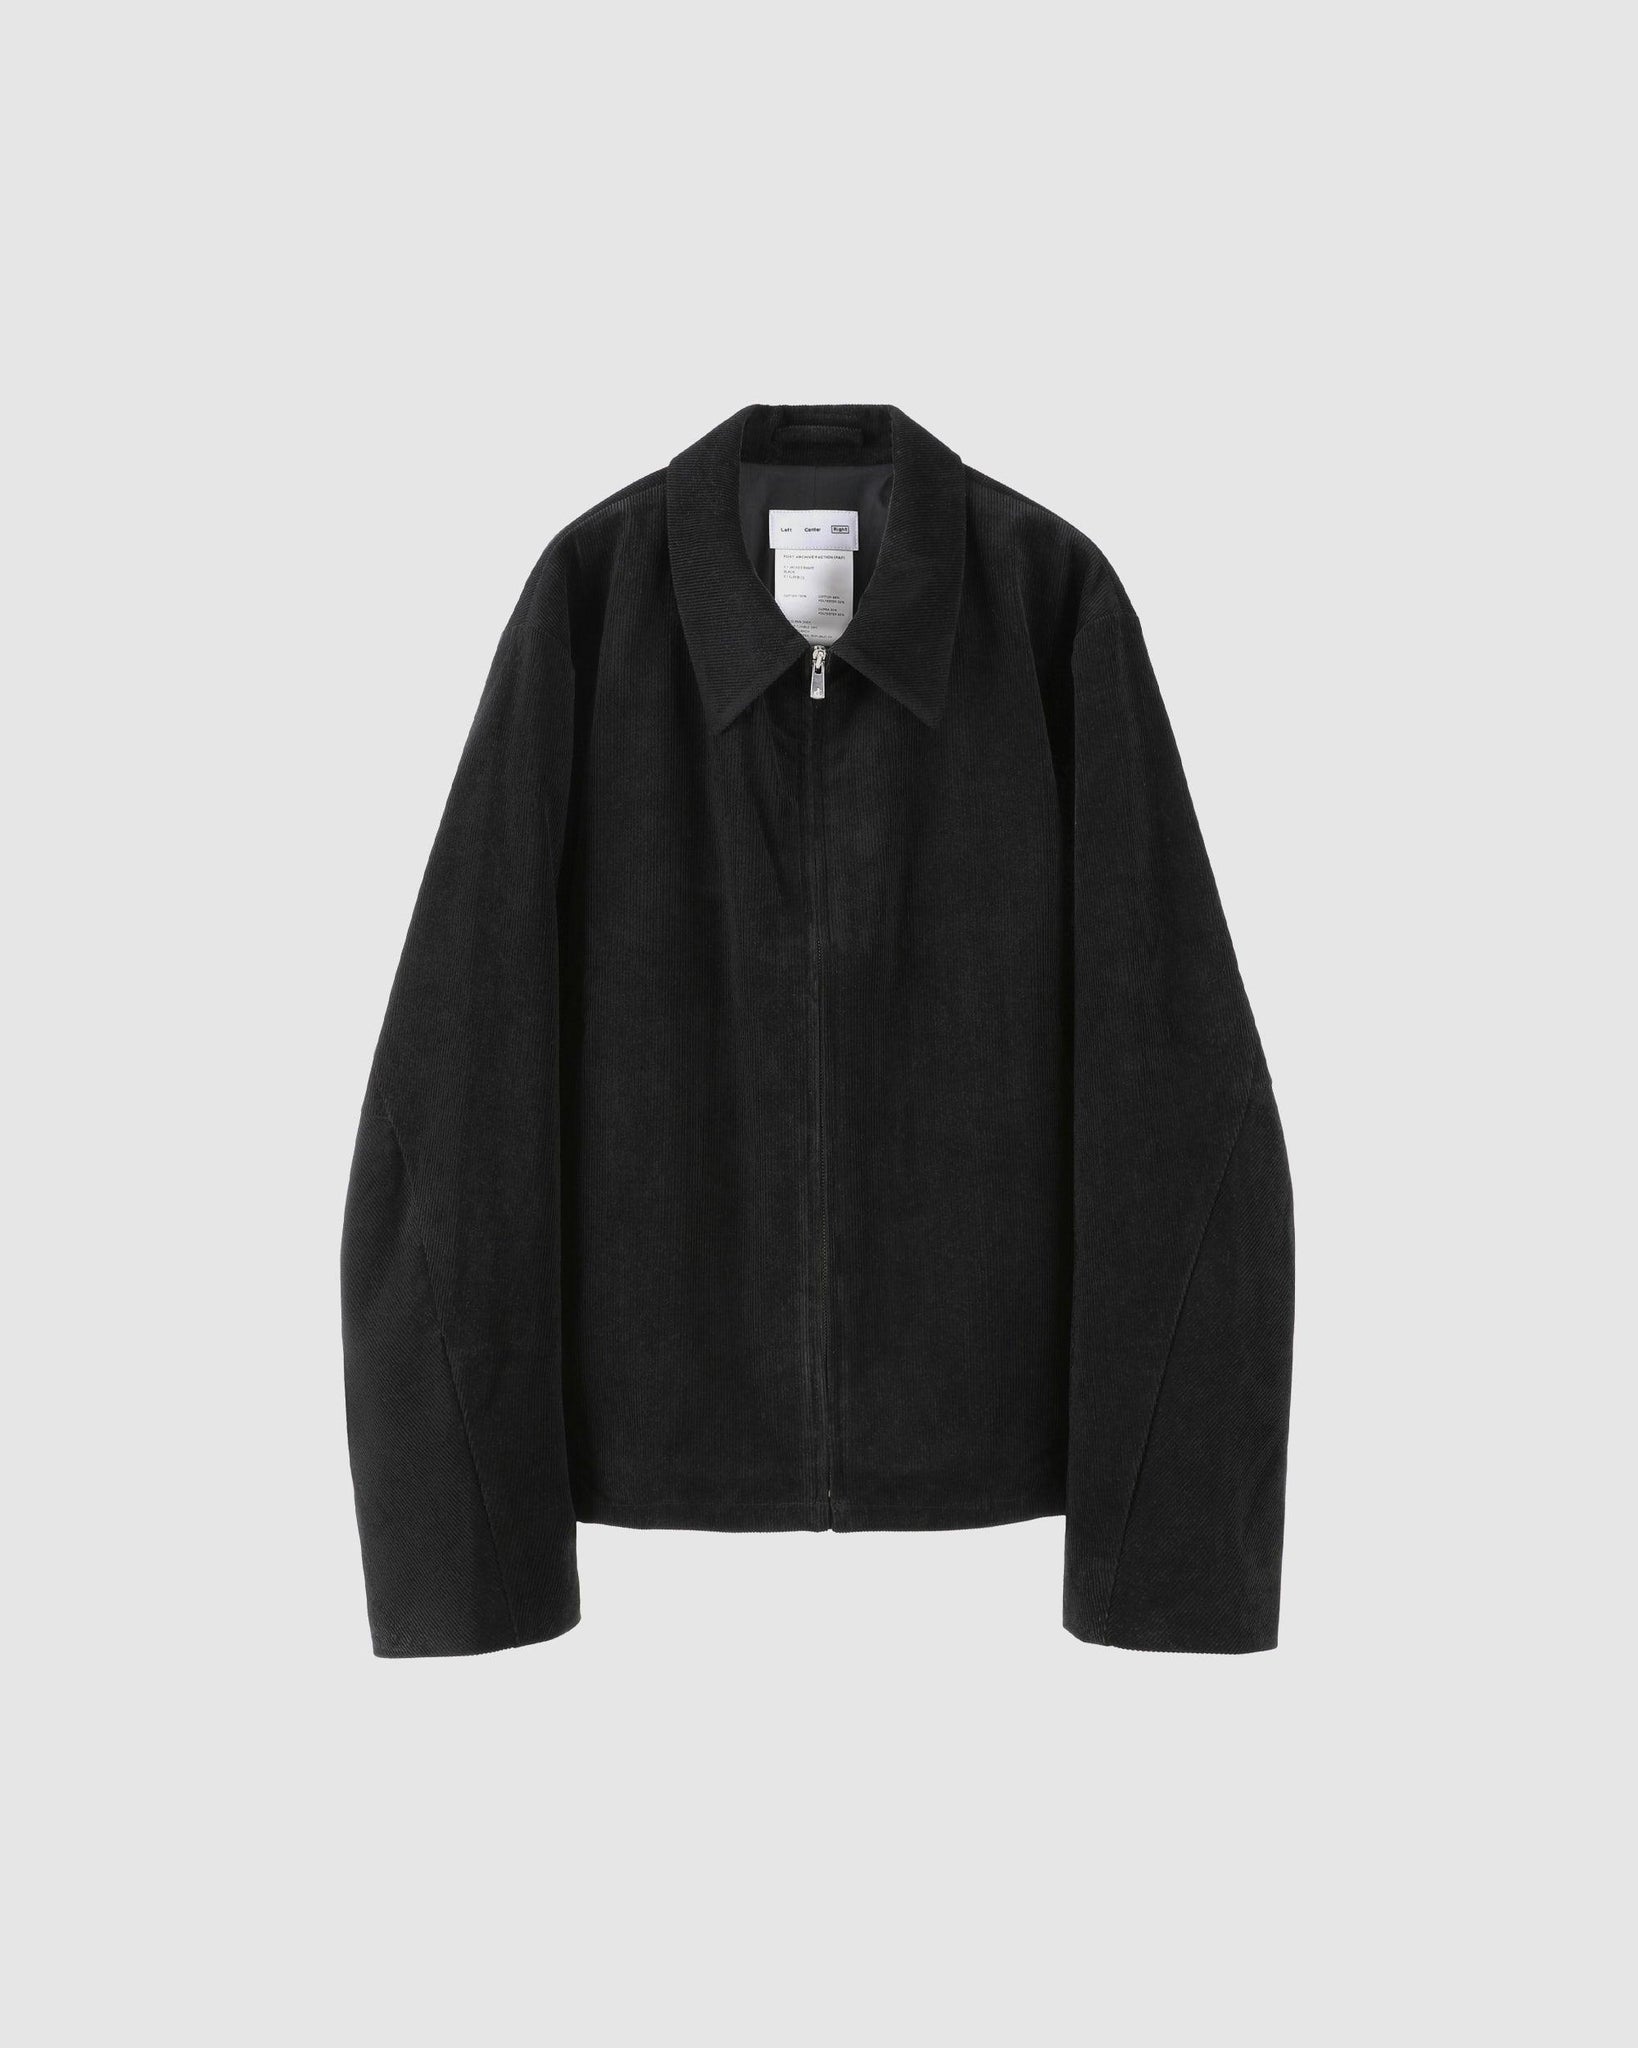 5.1 Jacket Right Black - {{ collection.title }} - Chinatown Country Club 